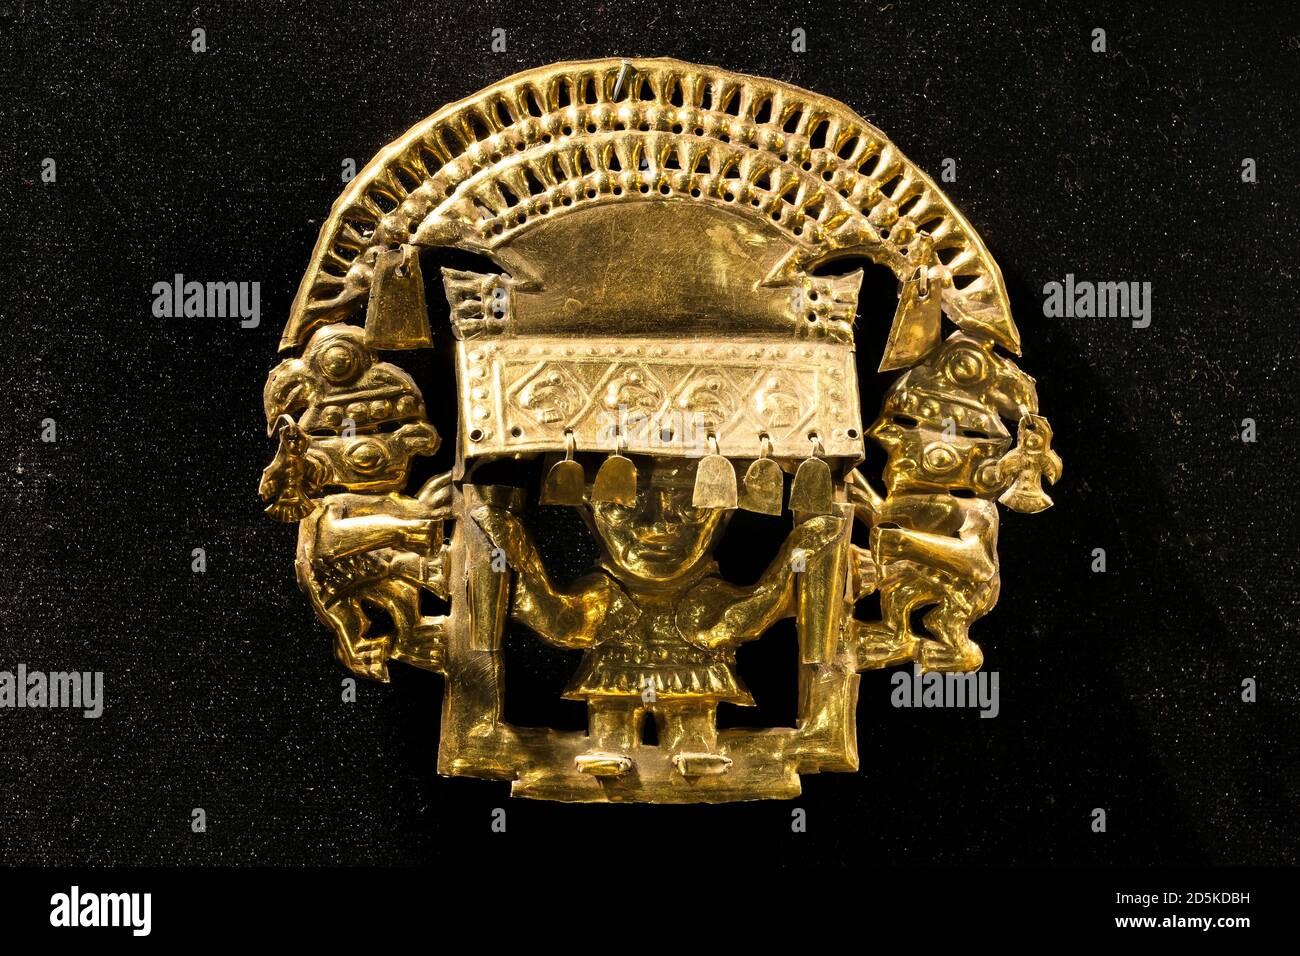 Gold earring of chimu culture, The metalware gallery, 'National Museum of Archaeology, Anthropology and History of Peru', Lima, Peru, South America Stock Photo